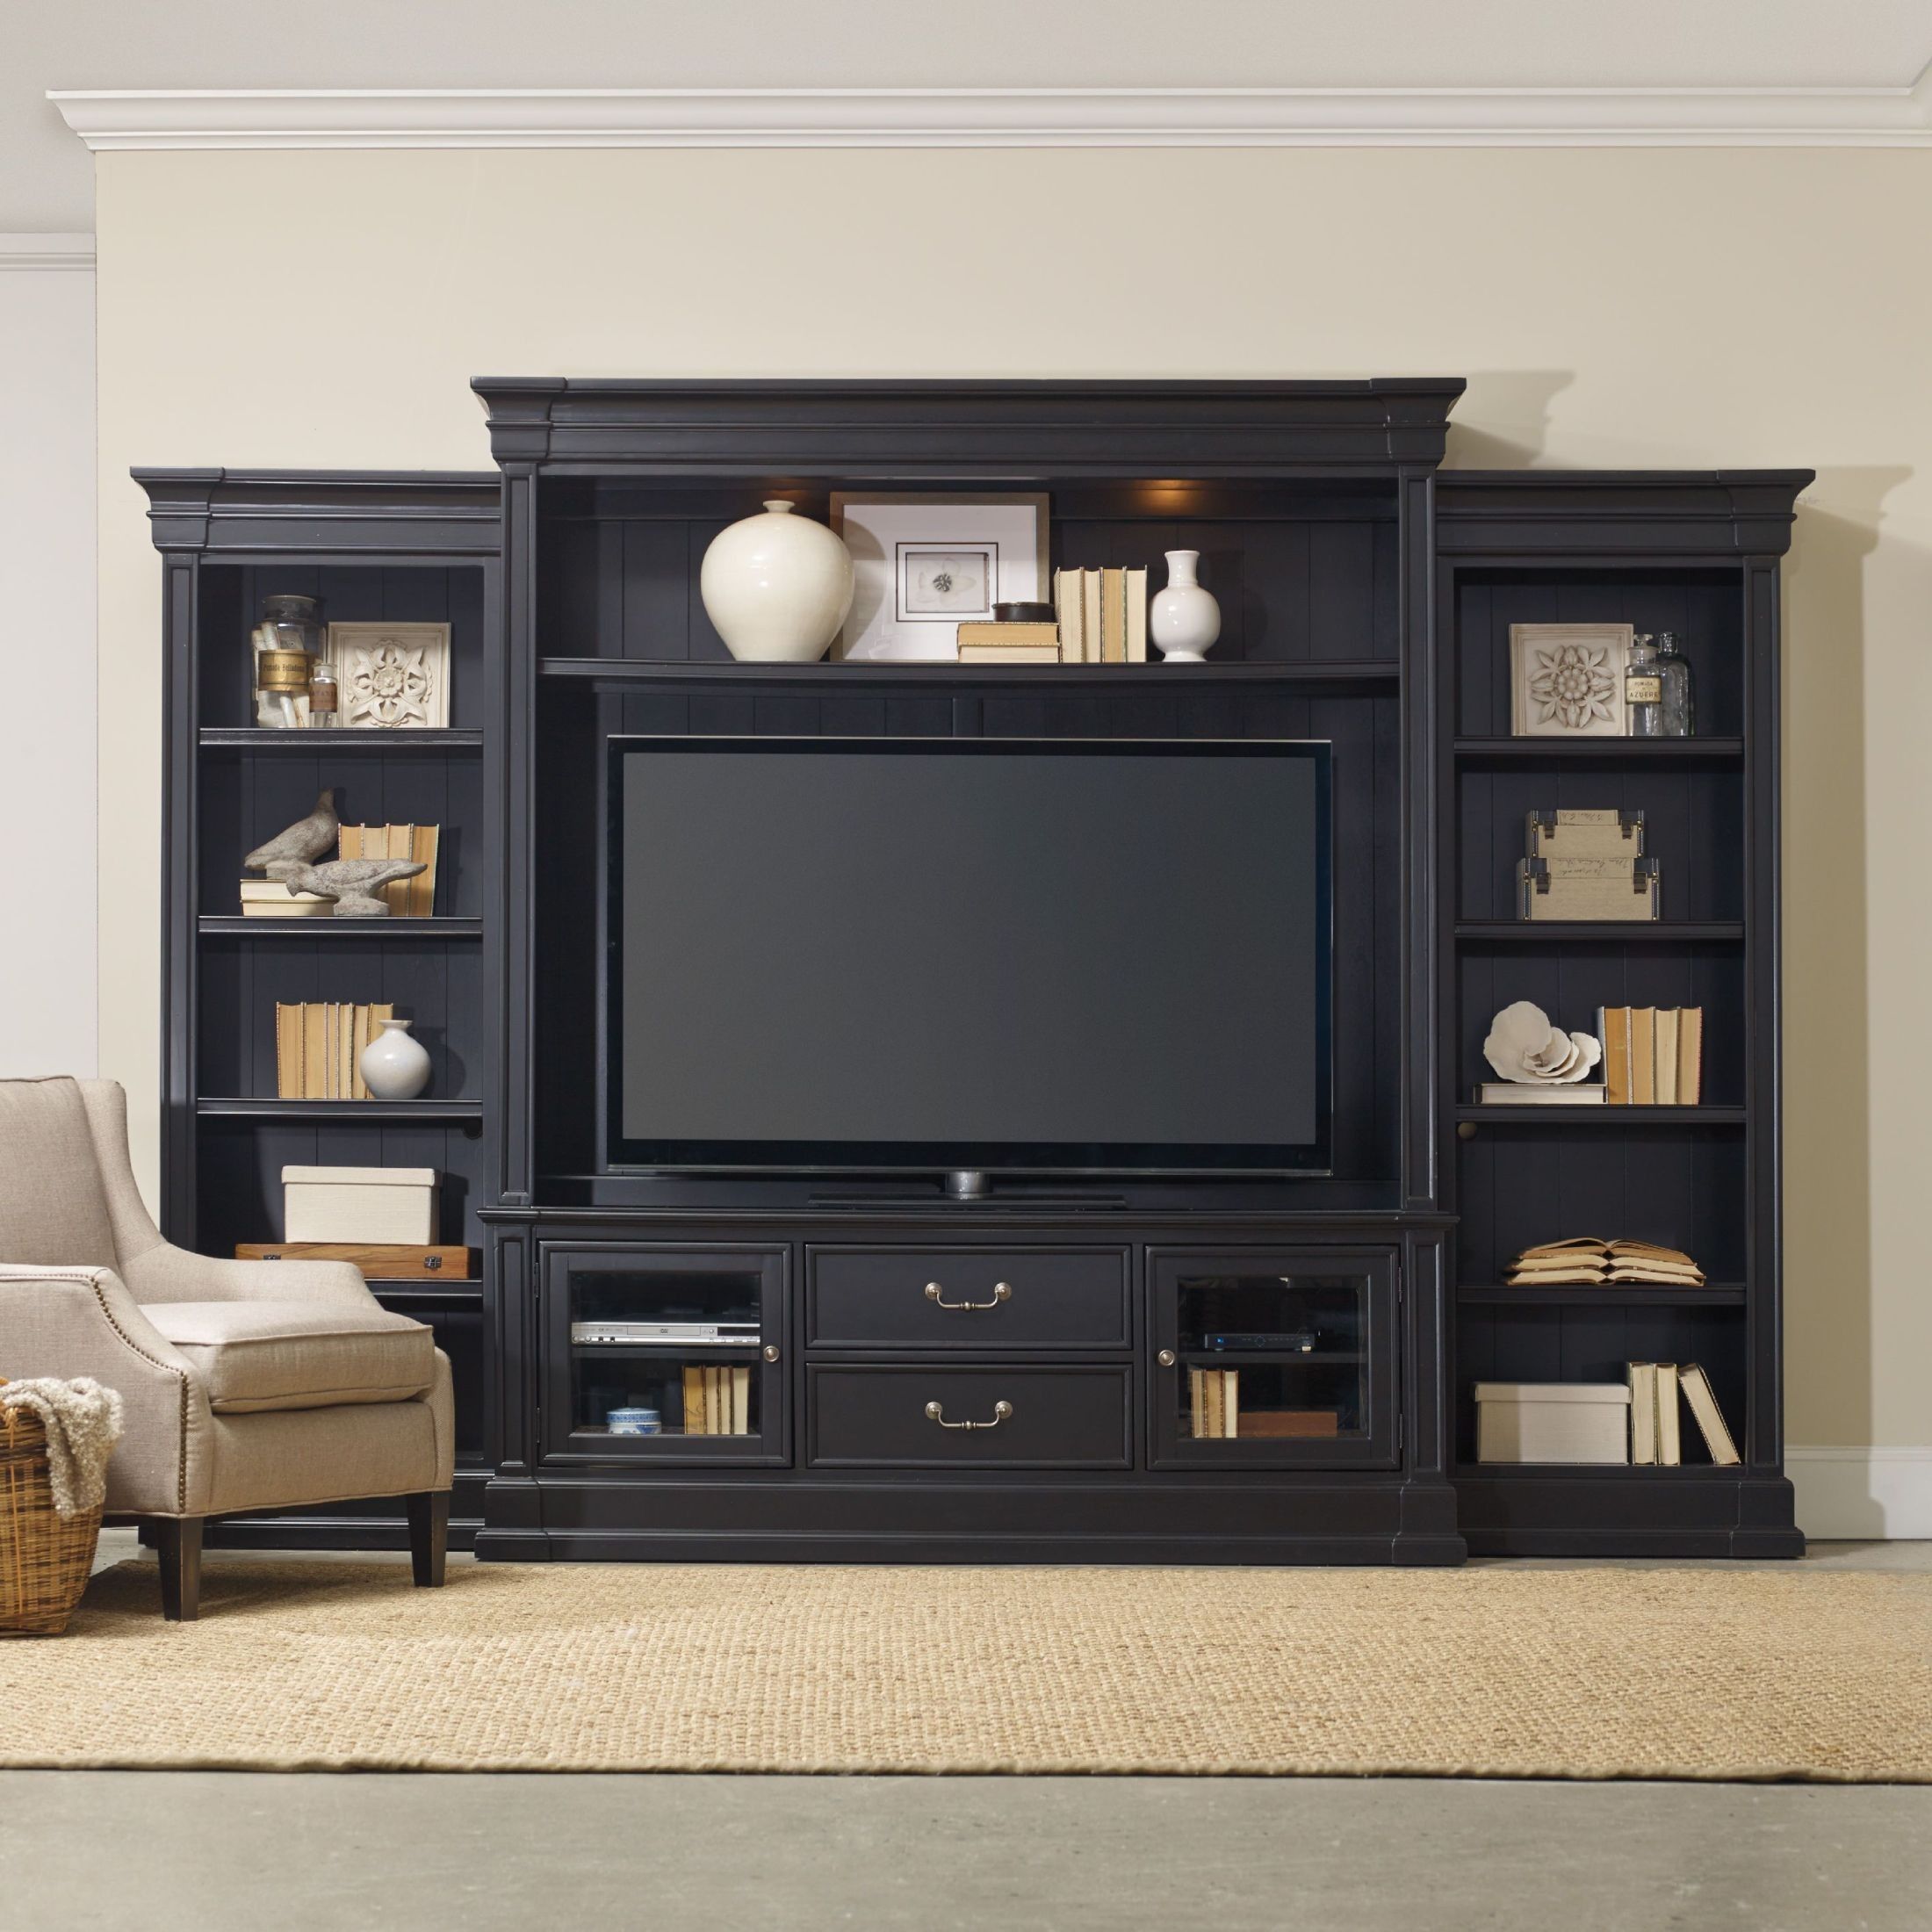 Clermont Black Entertainment Wall Unit, 5371 70222, Hooker Furniture Inside Black Rgb Entertainment Centers (Gallery 13 of 20)